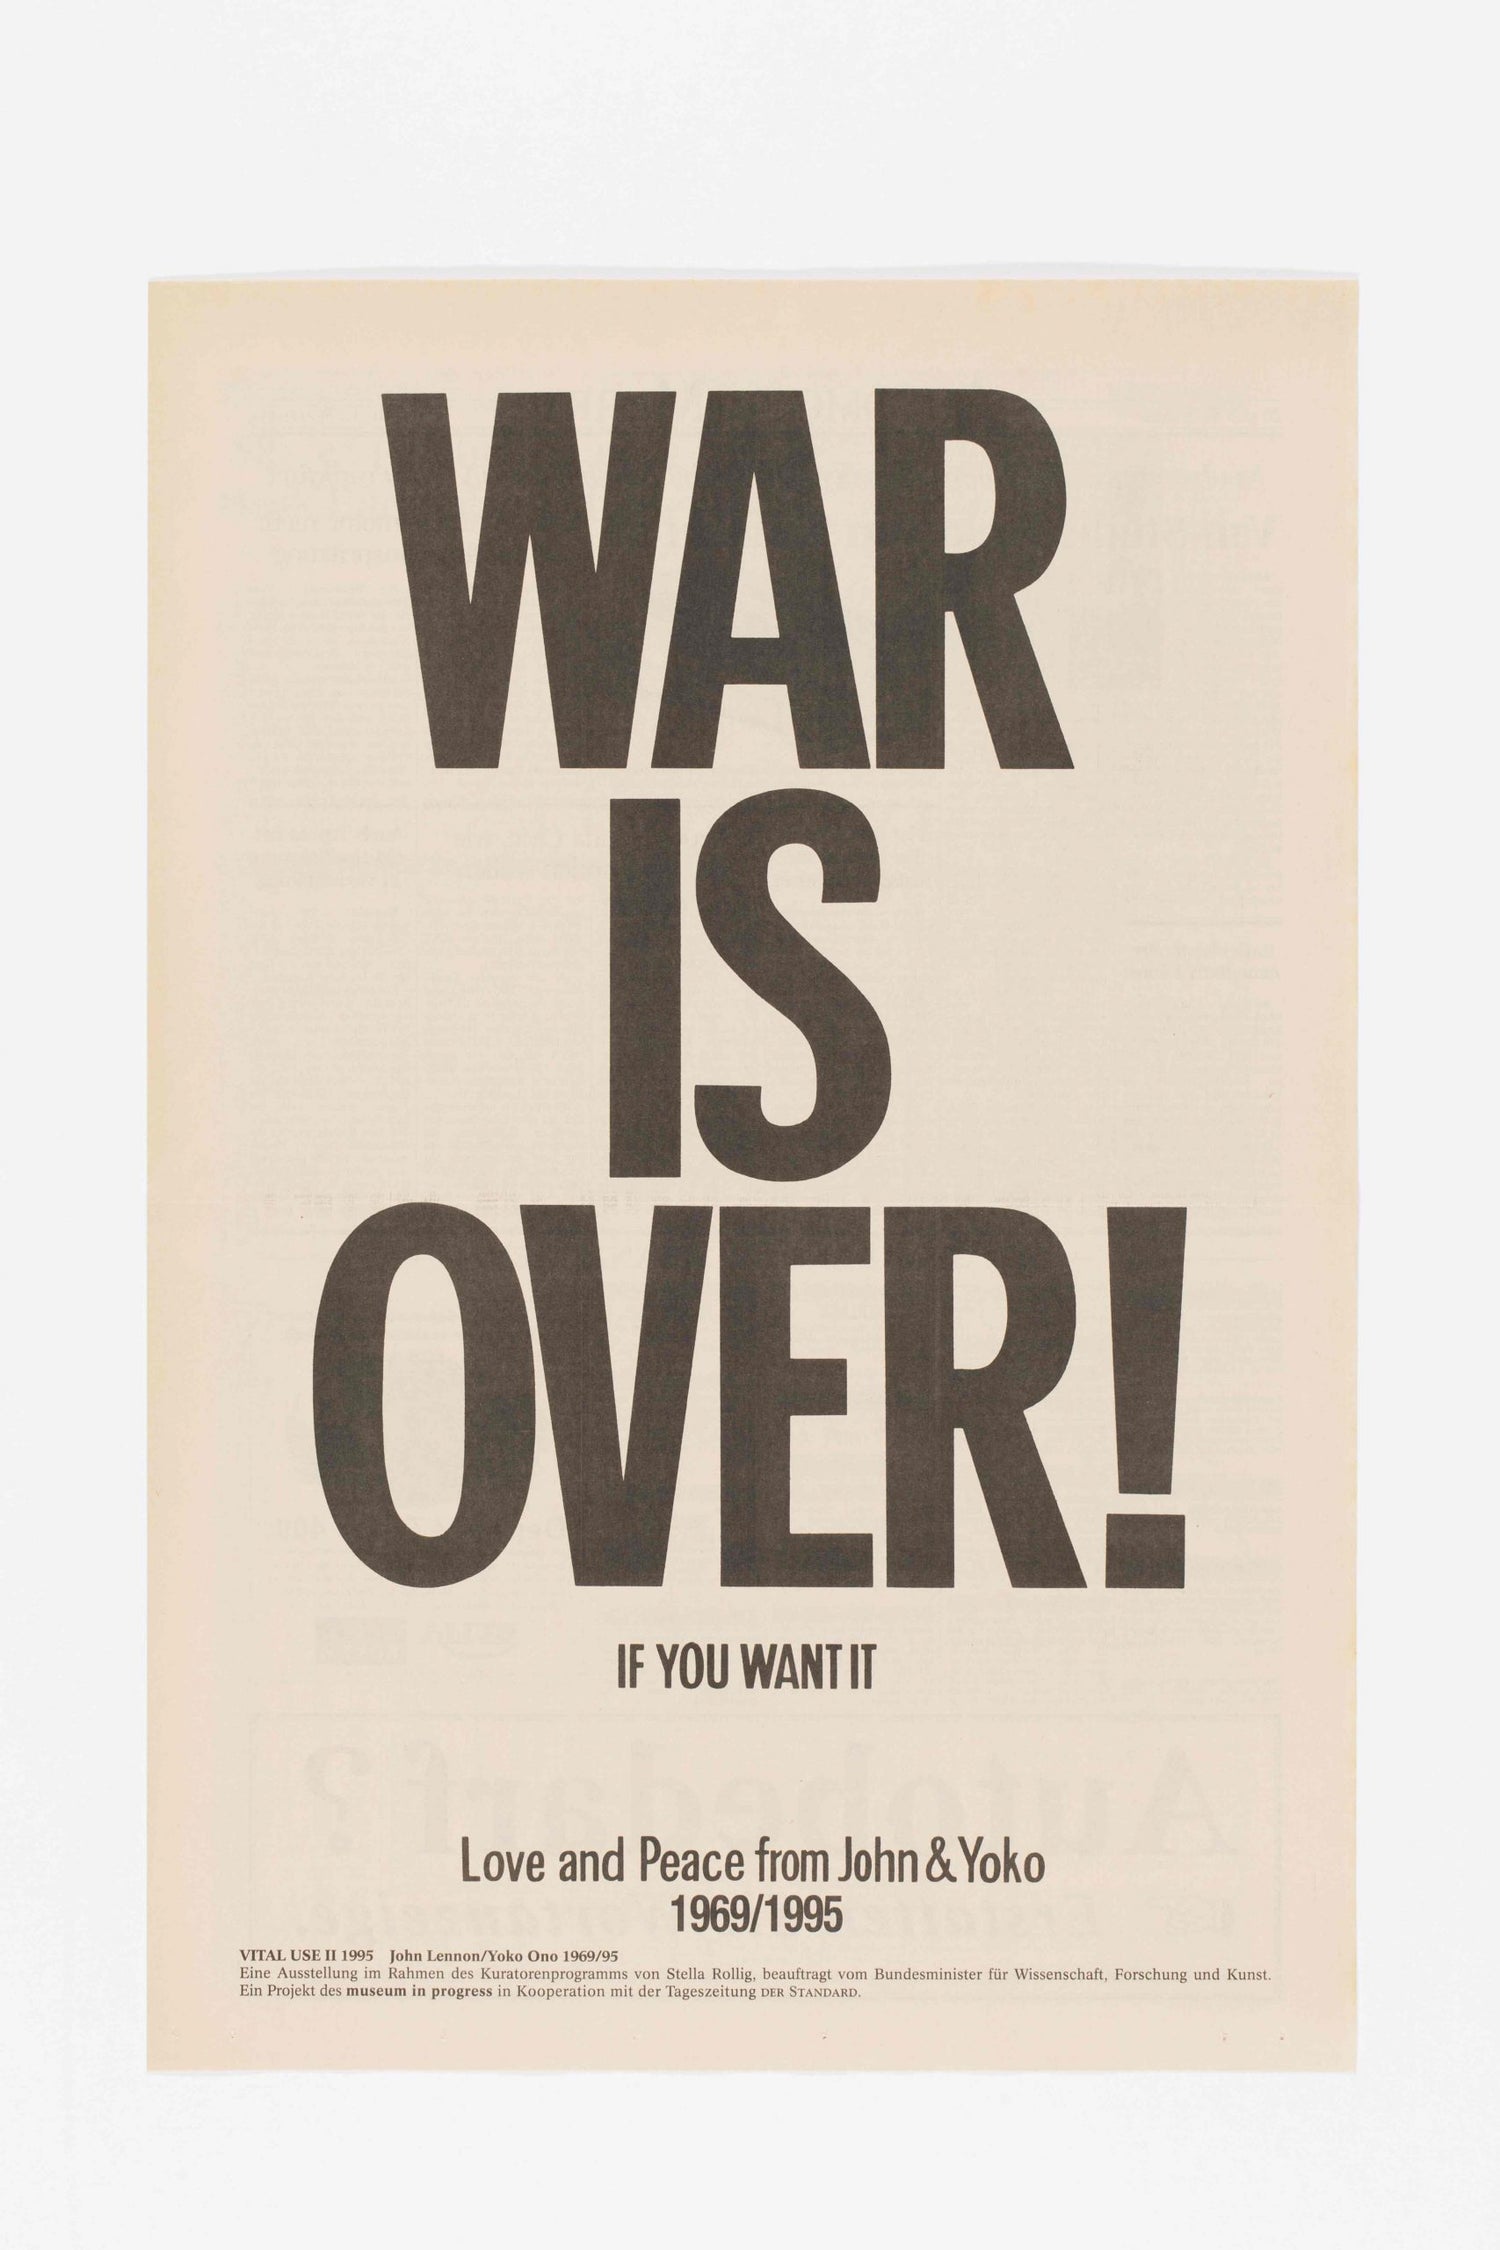 Yoko Ono John Lennon War is Over if you want it limited edition mutliples museum in pgroess